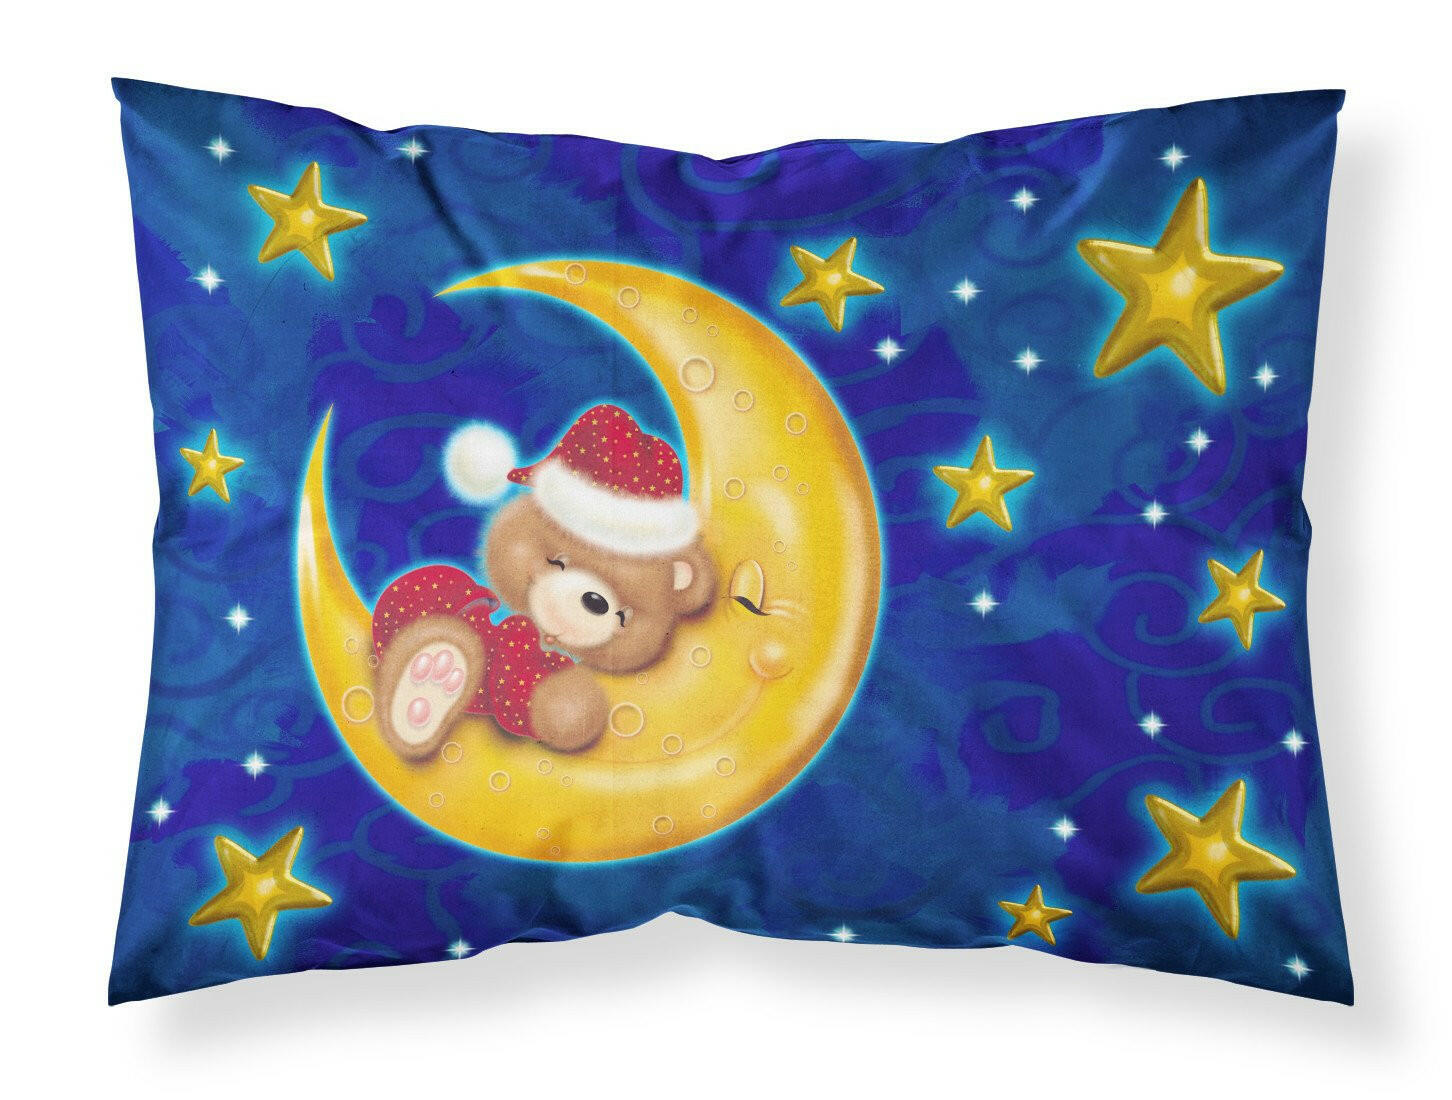 Bear Sleeping in the Moon and Stars Fabric Standard Pillowcase APH514BPILLOWCASE by Caroline's Treasures